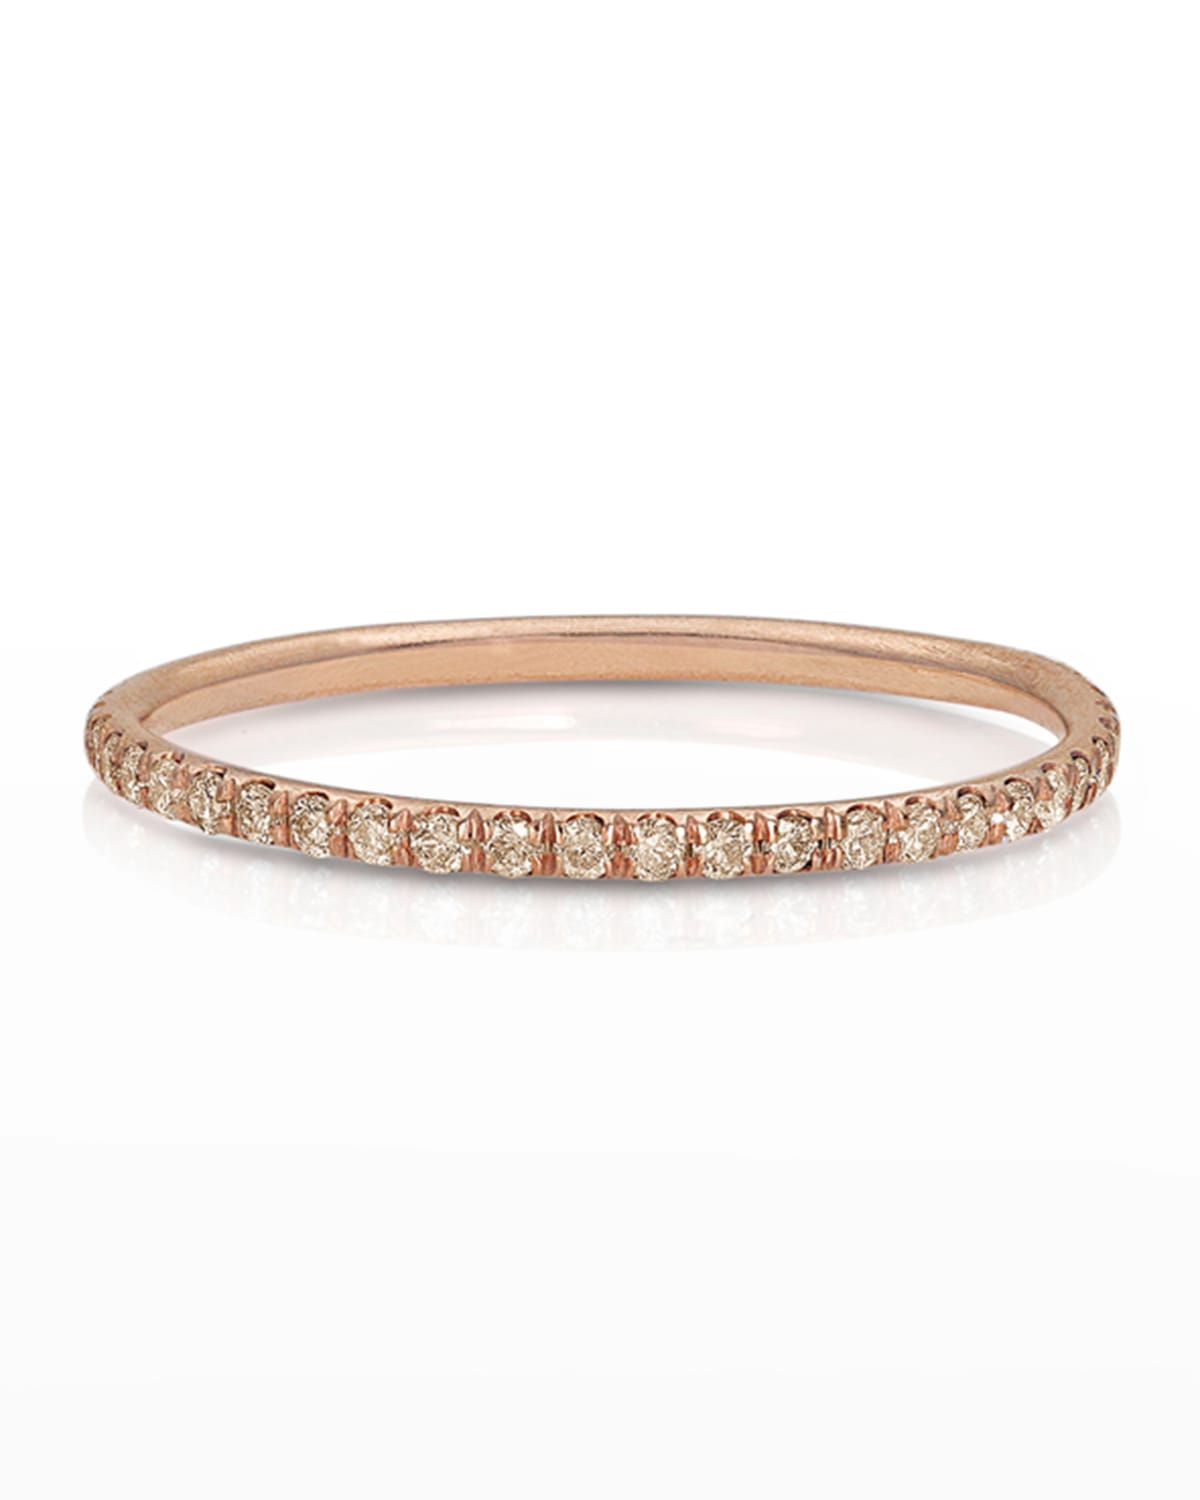 18k Rose Gold Champagne Diamond Delicate Stacking Ring, Size 7